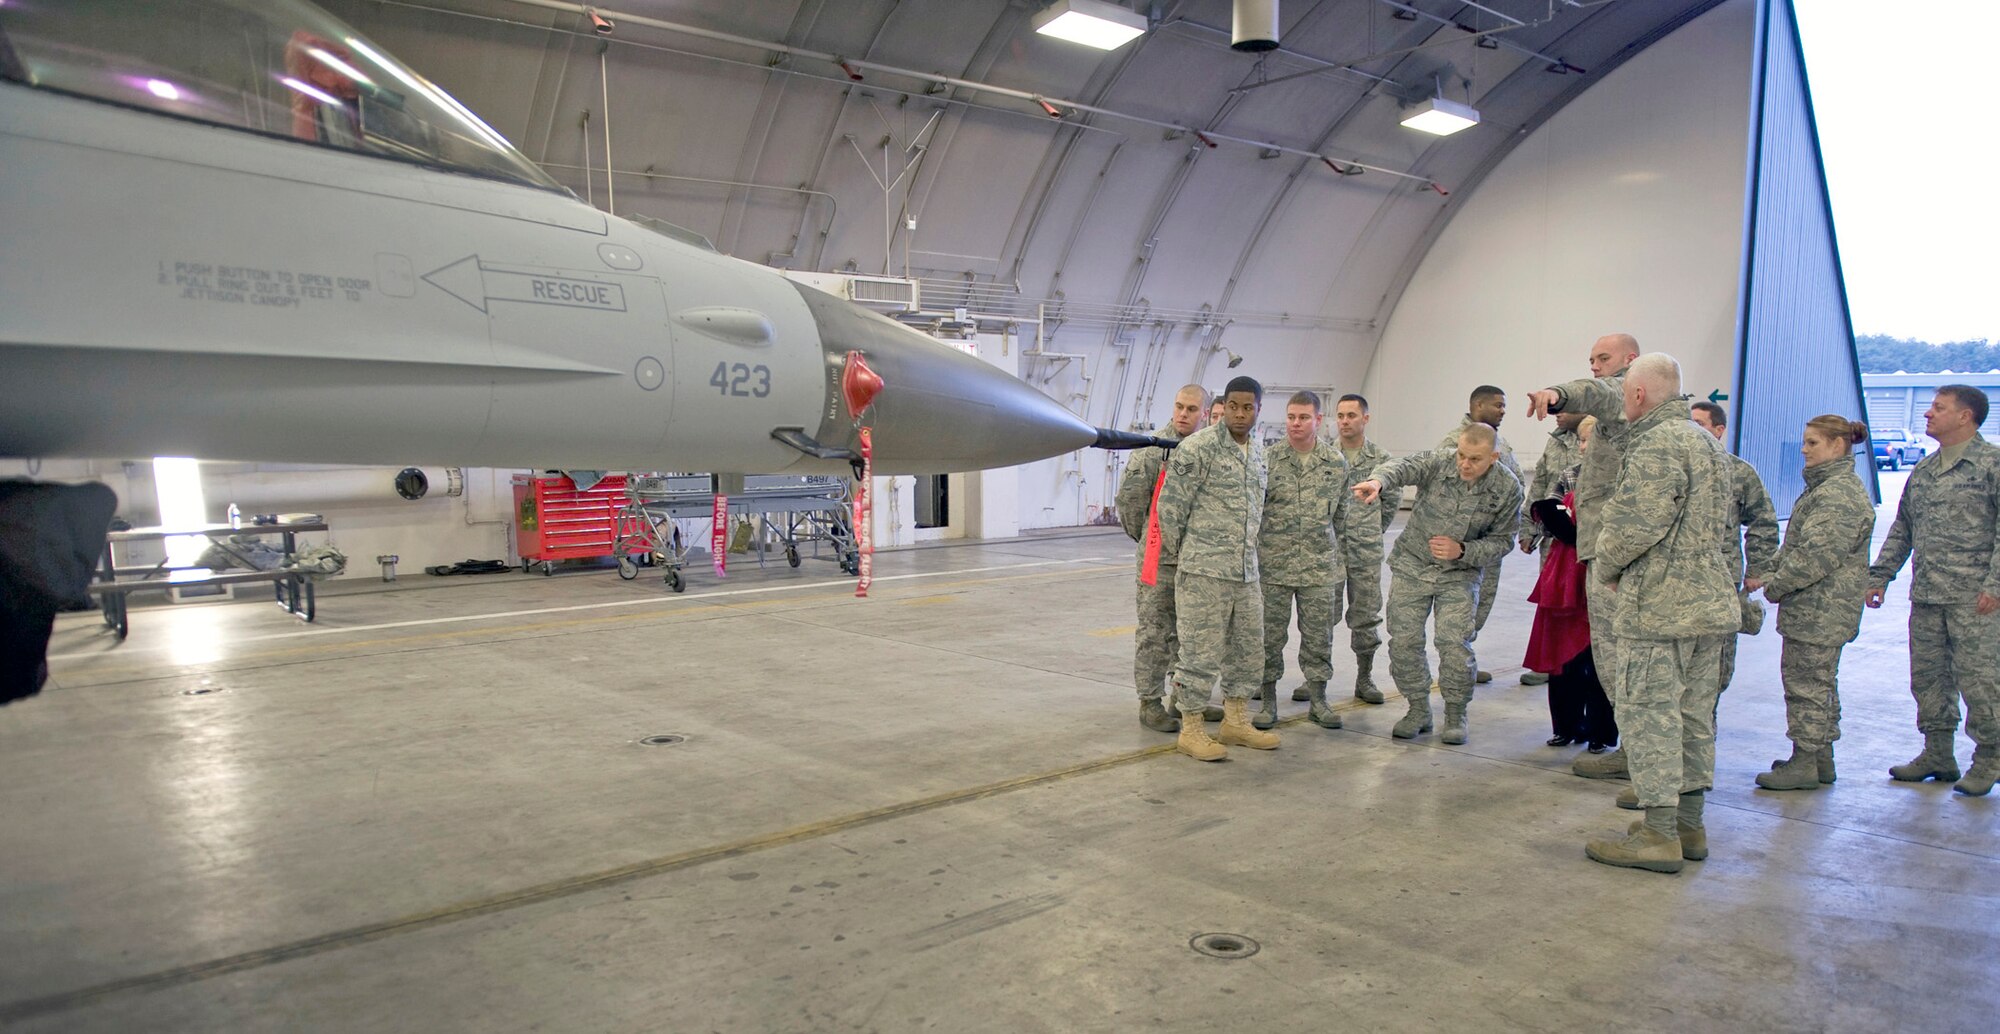 Tech. Sgt. Jarid Morris (right, pointing) identifies parts of an F-16 Fighting Falcon for Chief Master Sgt. of the Air Force James A. Roy (left, pointing) Dec. 28, 2010, in a hardened aircraft shelter at Misawa Air Base, Japan. At the end of the visit, Chief Roy gave Sergeant Morris a challenge coin for his hard work. Sergeant Morris is an avionics technician with the 14th Aircraft Maintenance Unit. (U.S. Air Force photo/Staff Sgt. Samuel Morse)